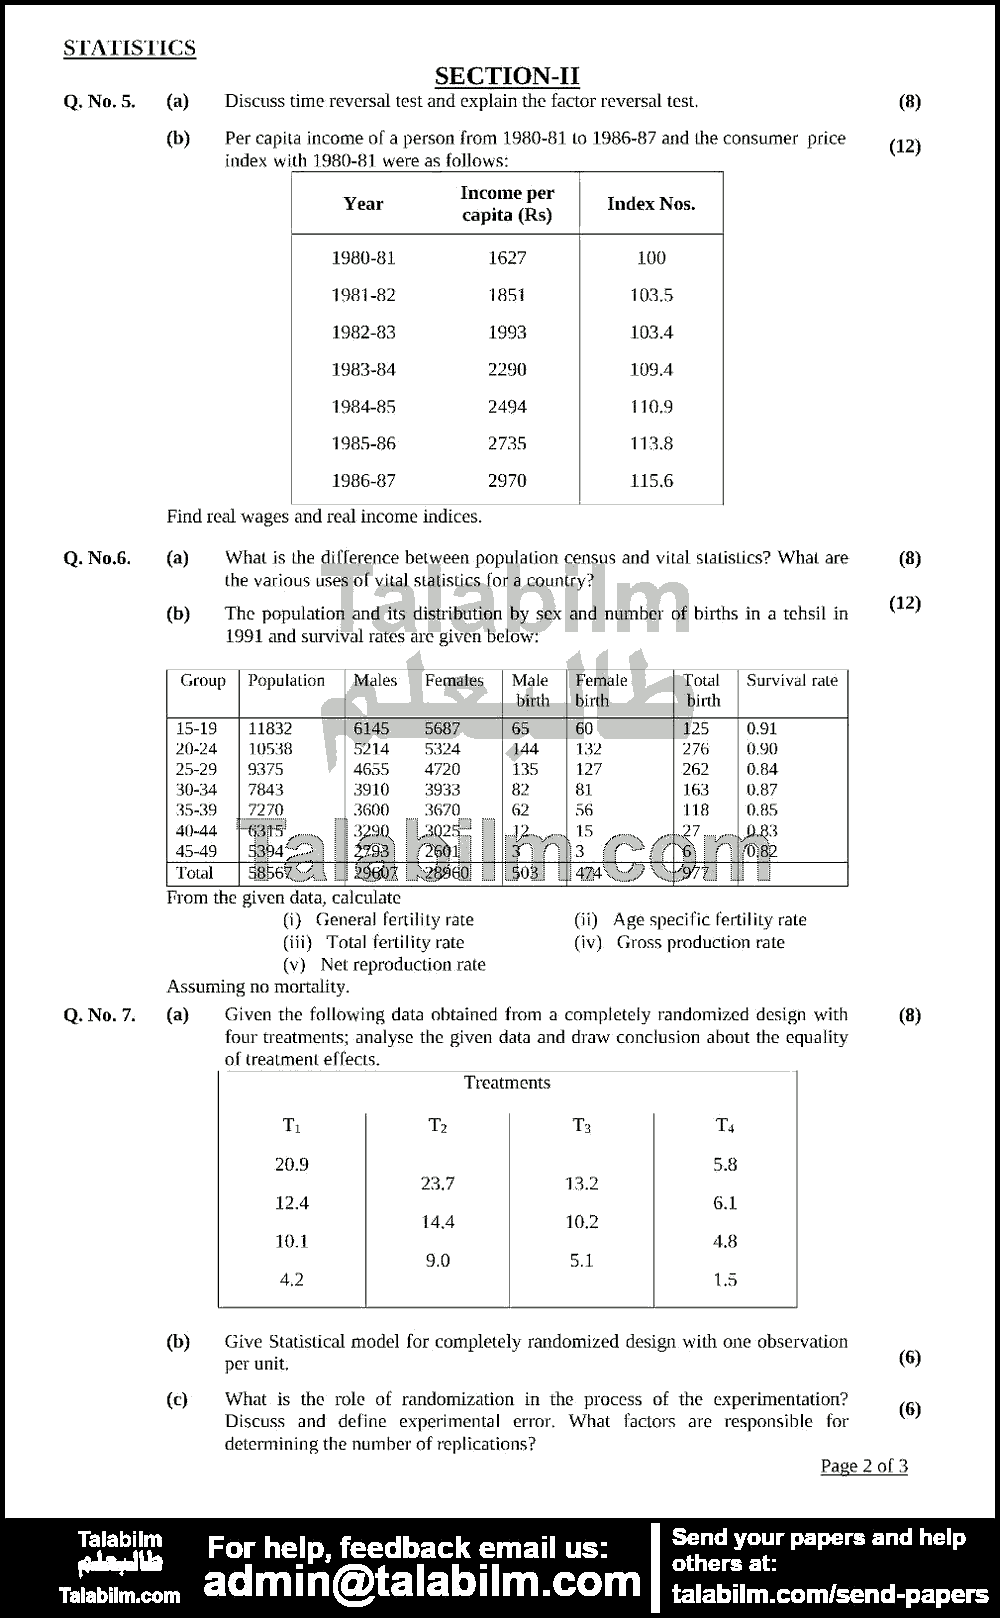 Statistics 0 past paper for 2017 Page No. 2